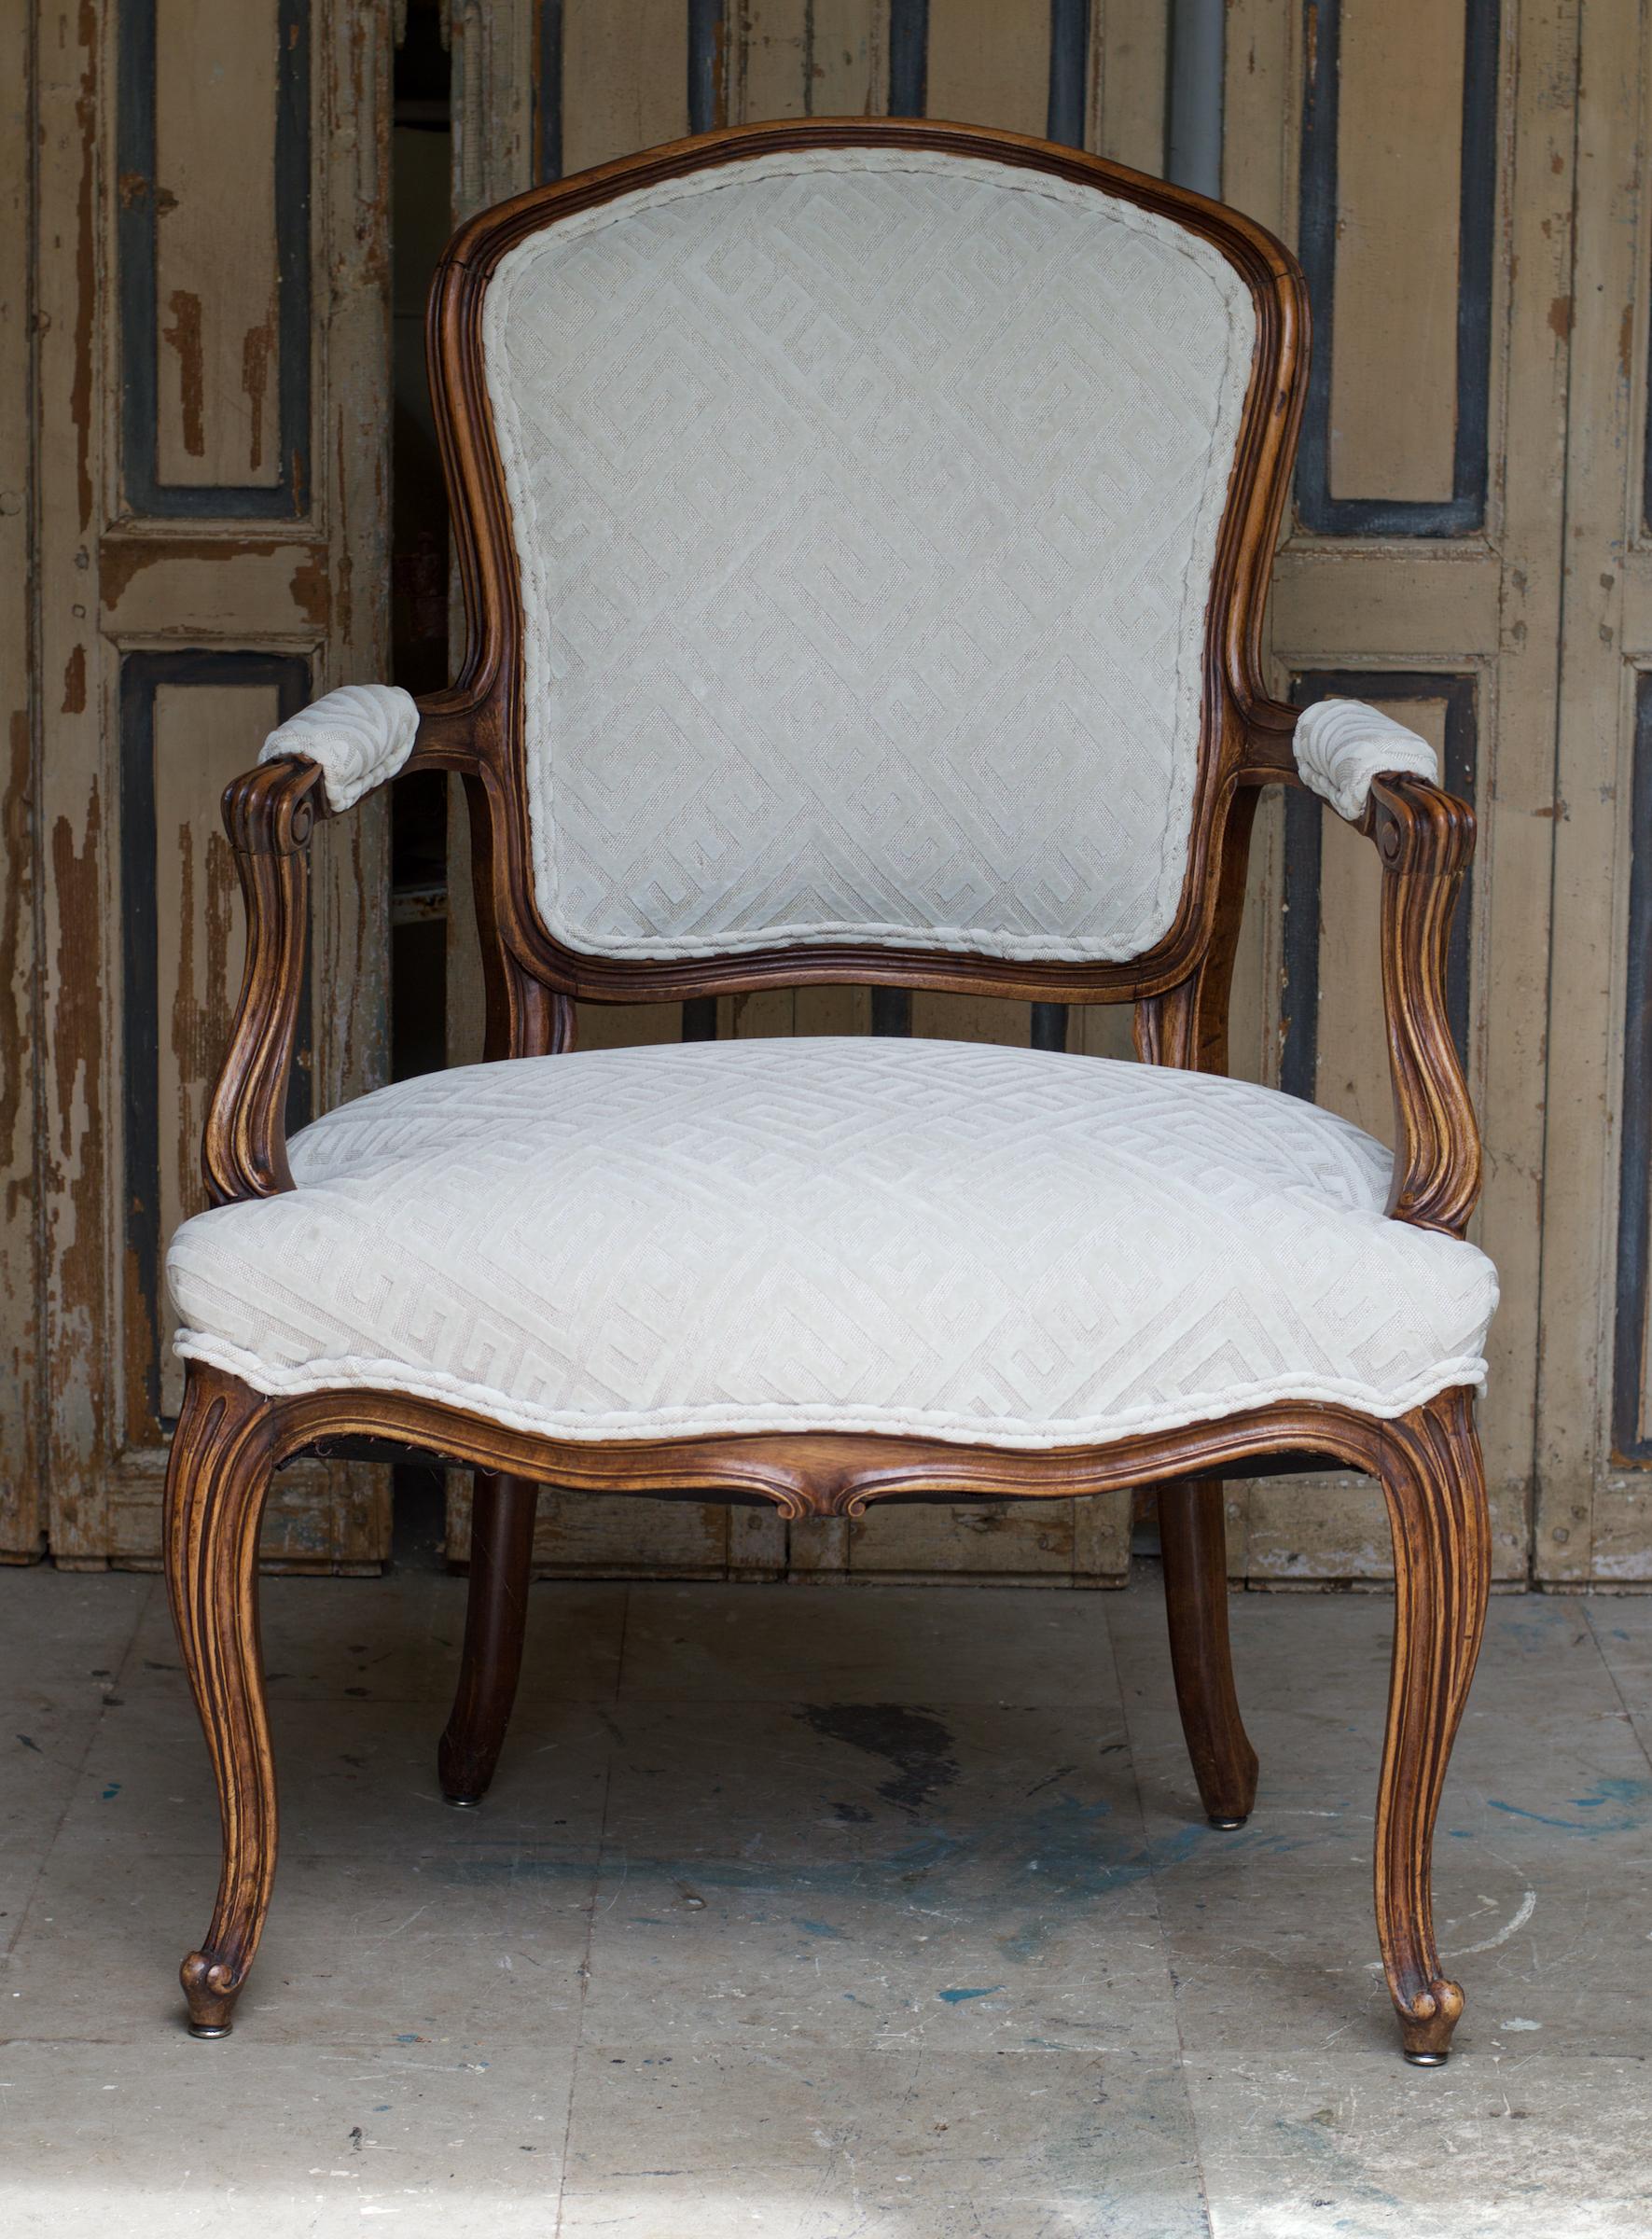 A glowing and chic Louis XV style fauteuil of carved fruitwood recently dressed in a neutral yet now, cut linen Greek key fabric. The look is Classic and sophisticated yet will allow for the 